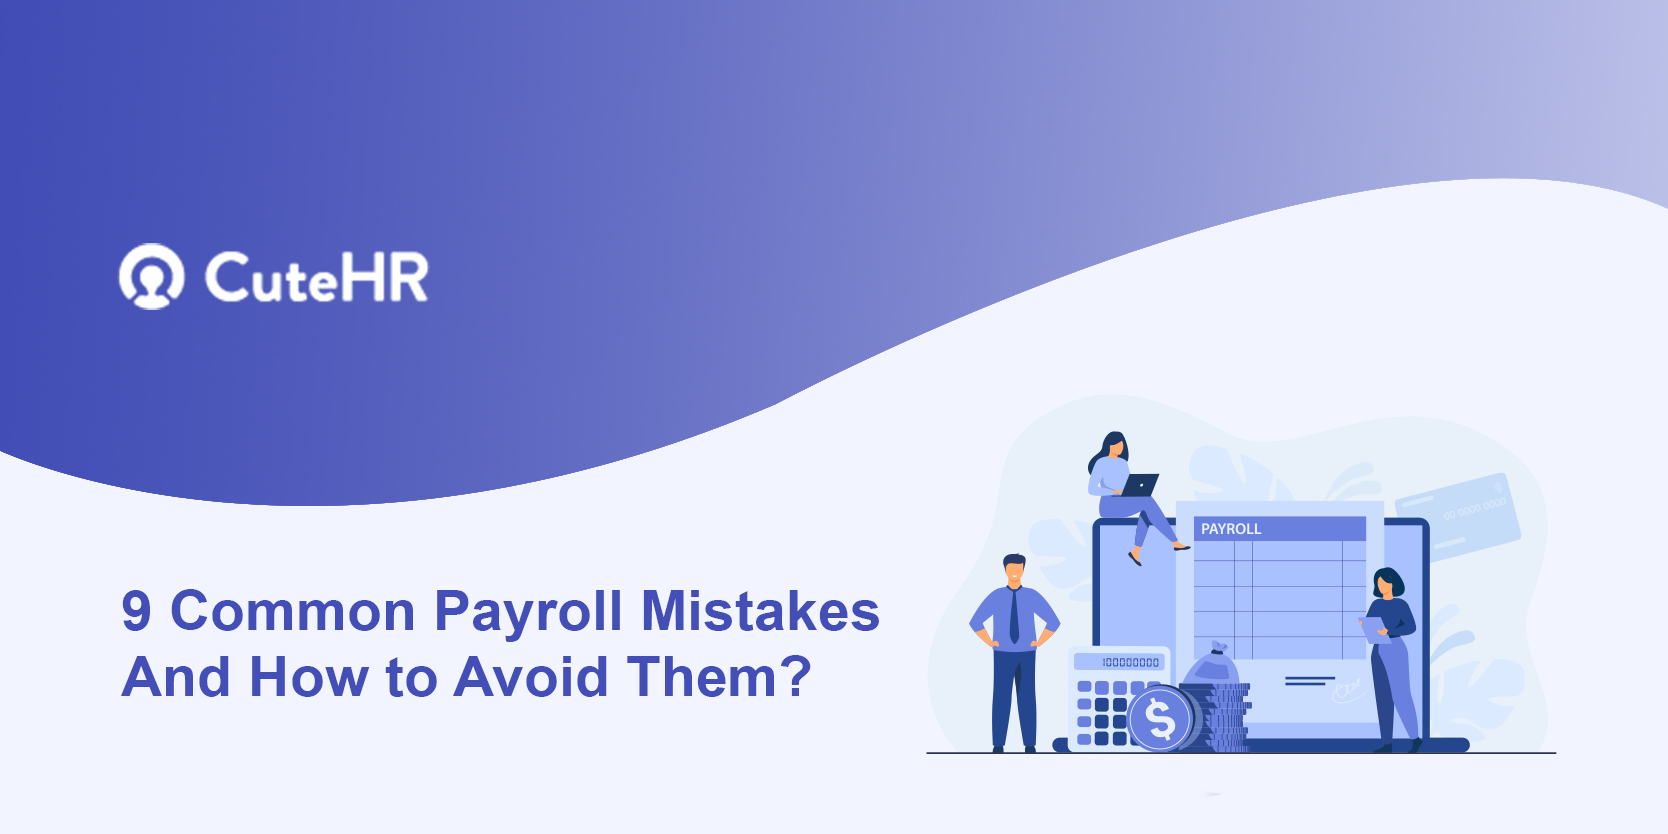 9 Common Payroll Mistakes And How to Avoid Them? - CuteHR